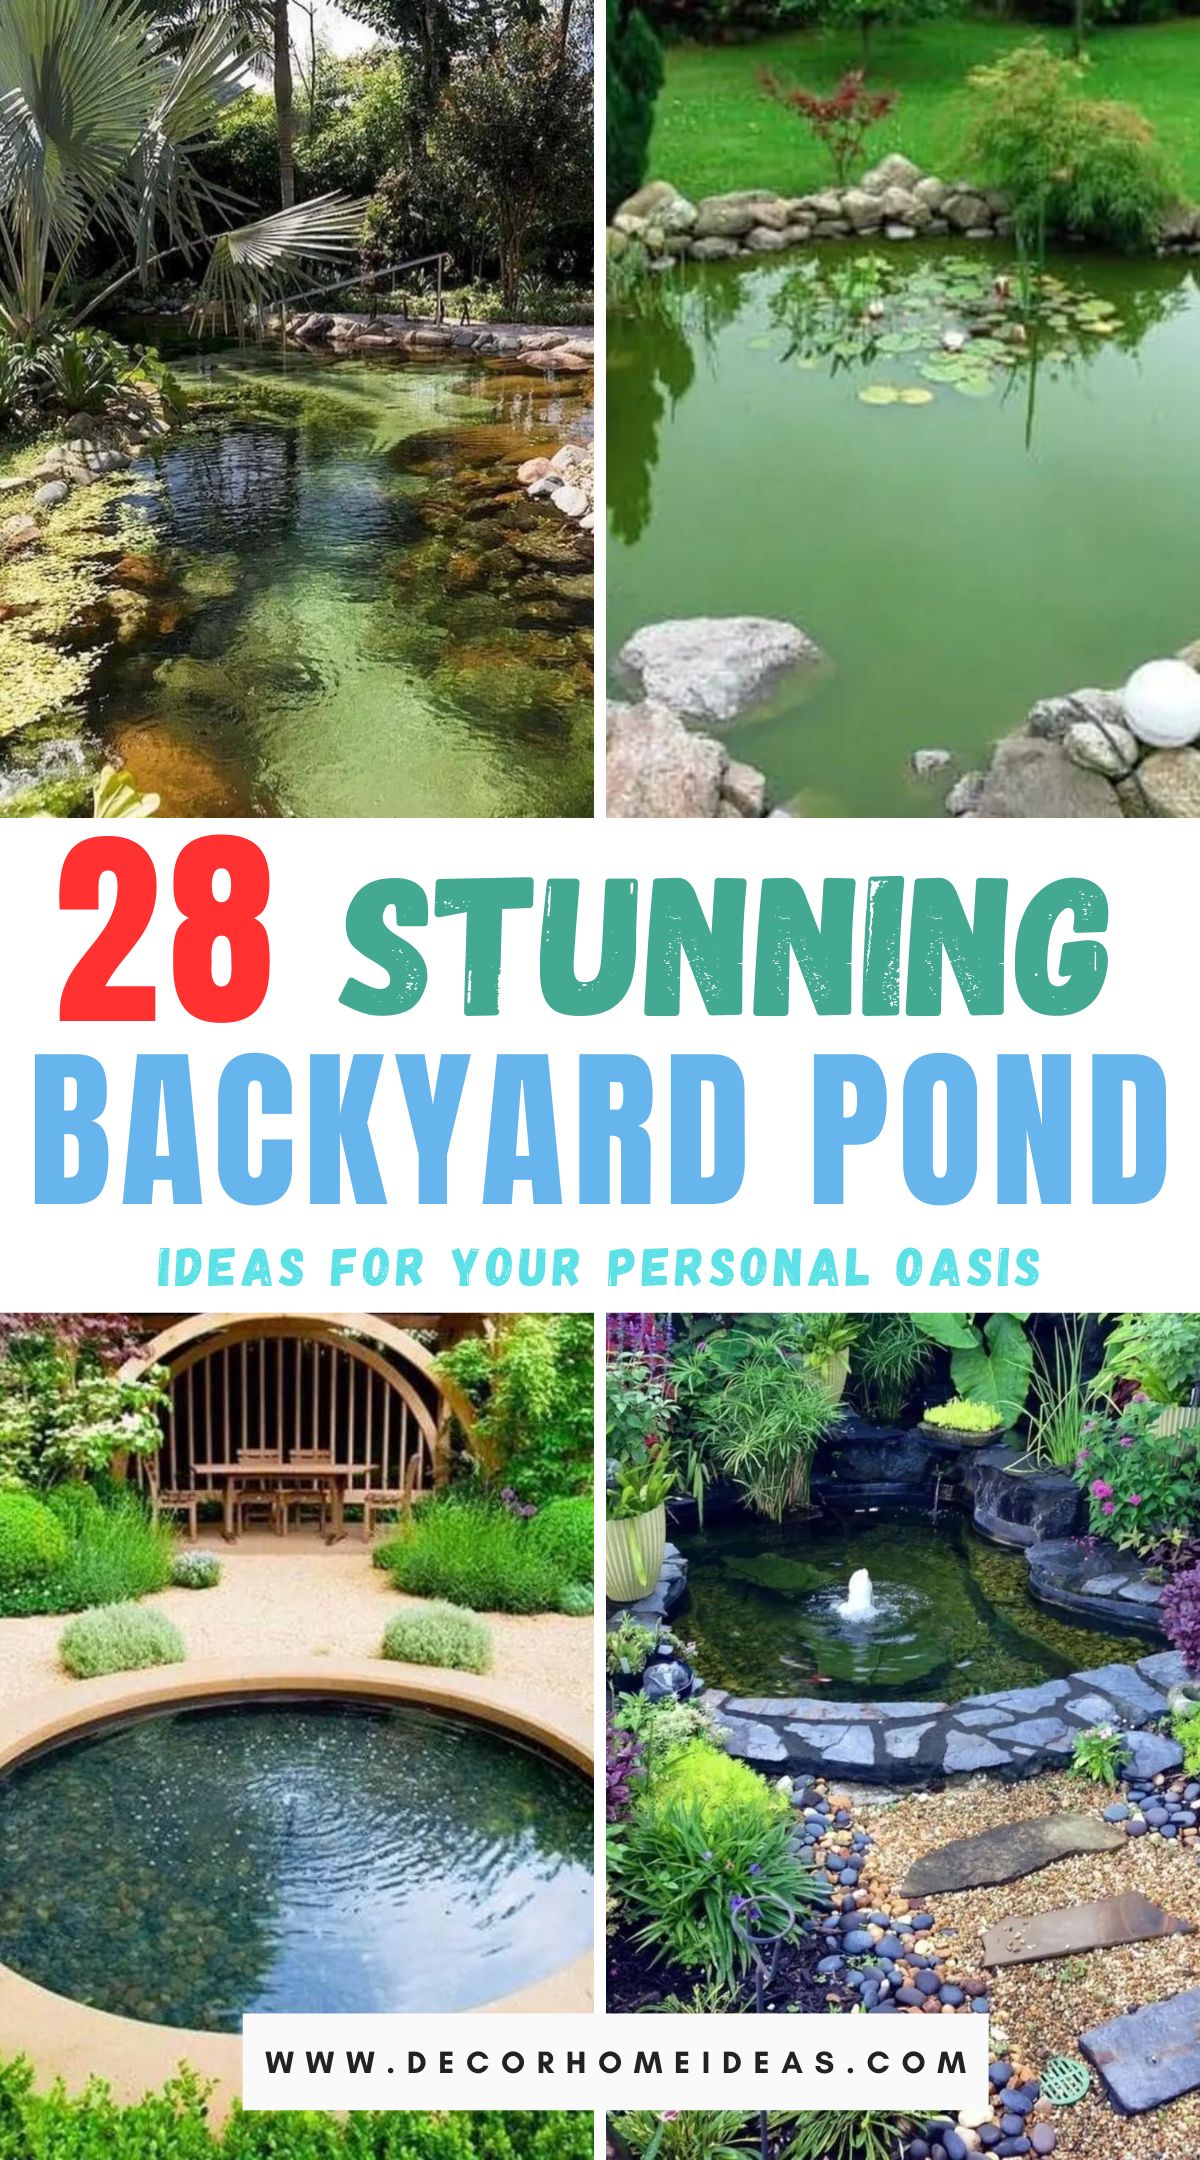 Transform your backyard into a serene water oasis with our collection of 28 enchanting pond ideas. Explore creative designs and landscaping inspirations to create a captivating aquatic retreat right in your own outdoor space.